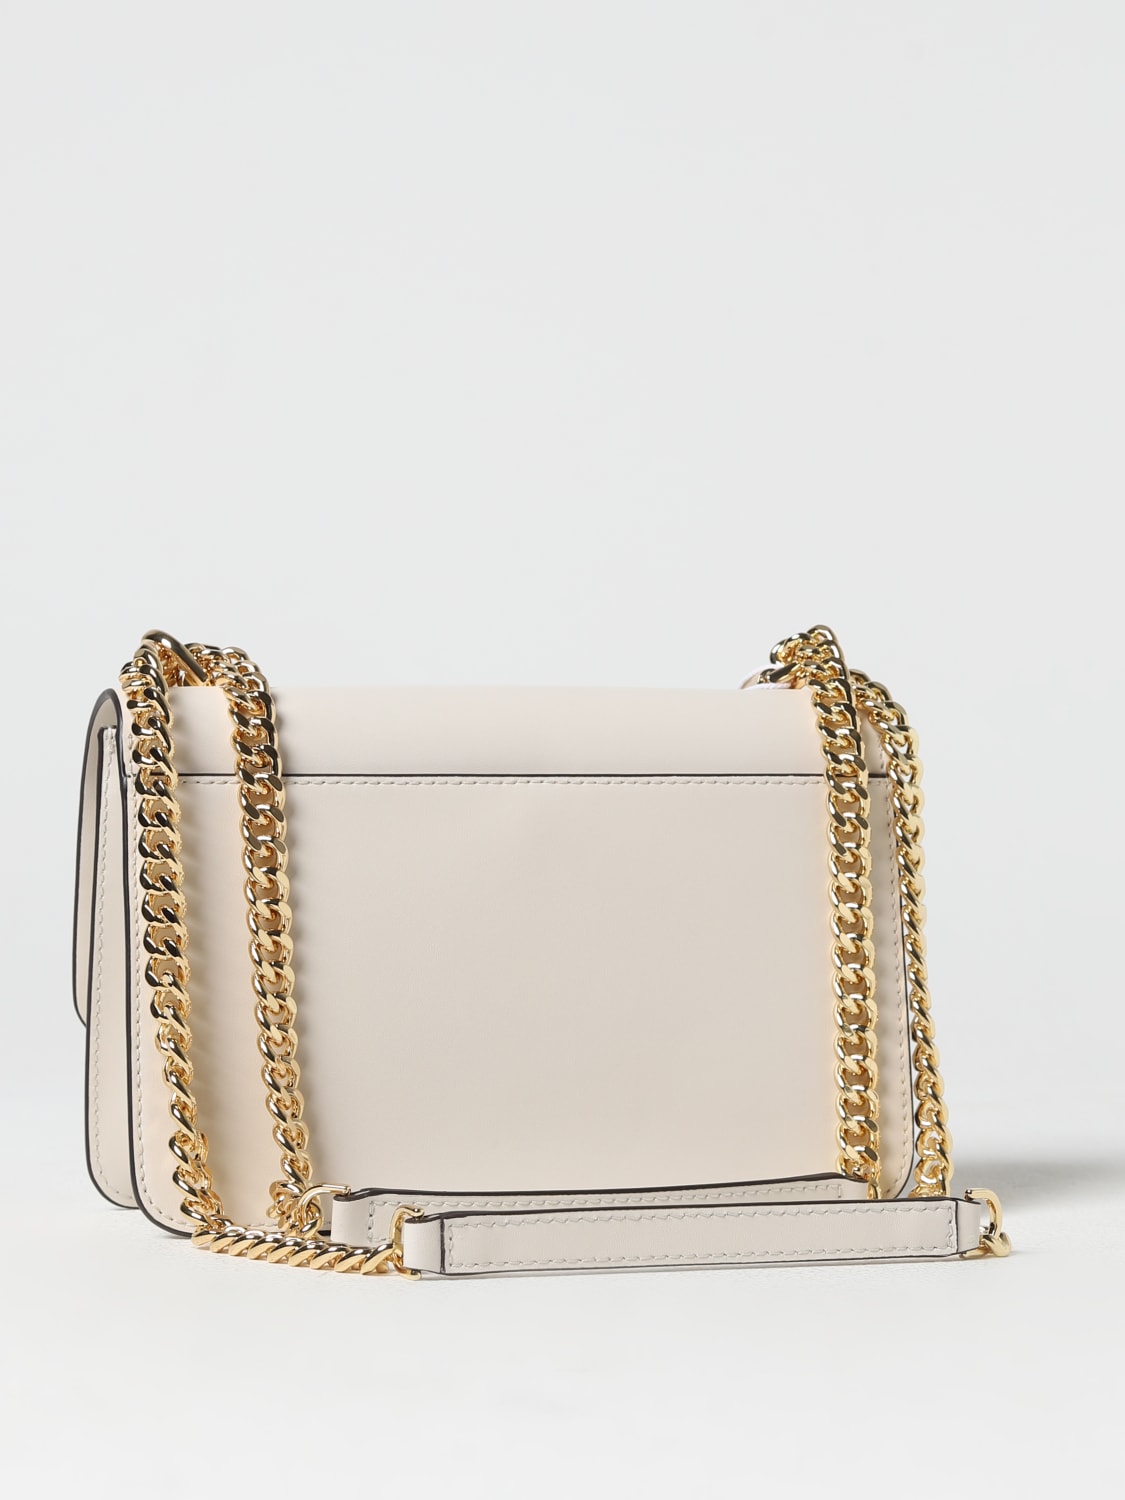 michael kors white bag with gold chain